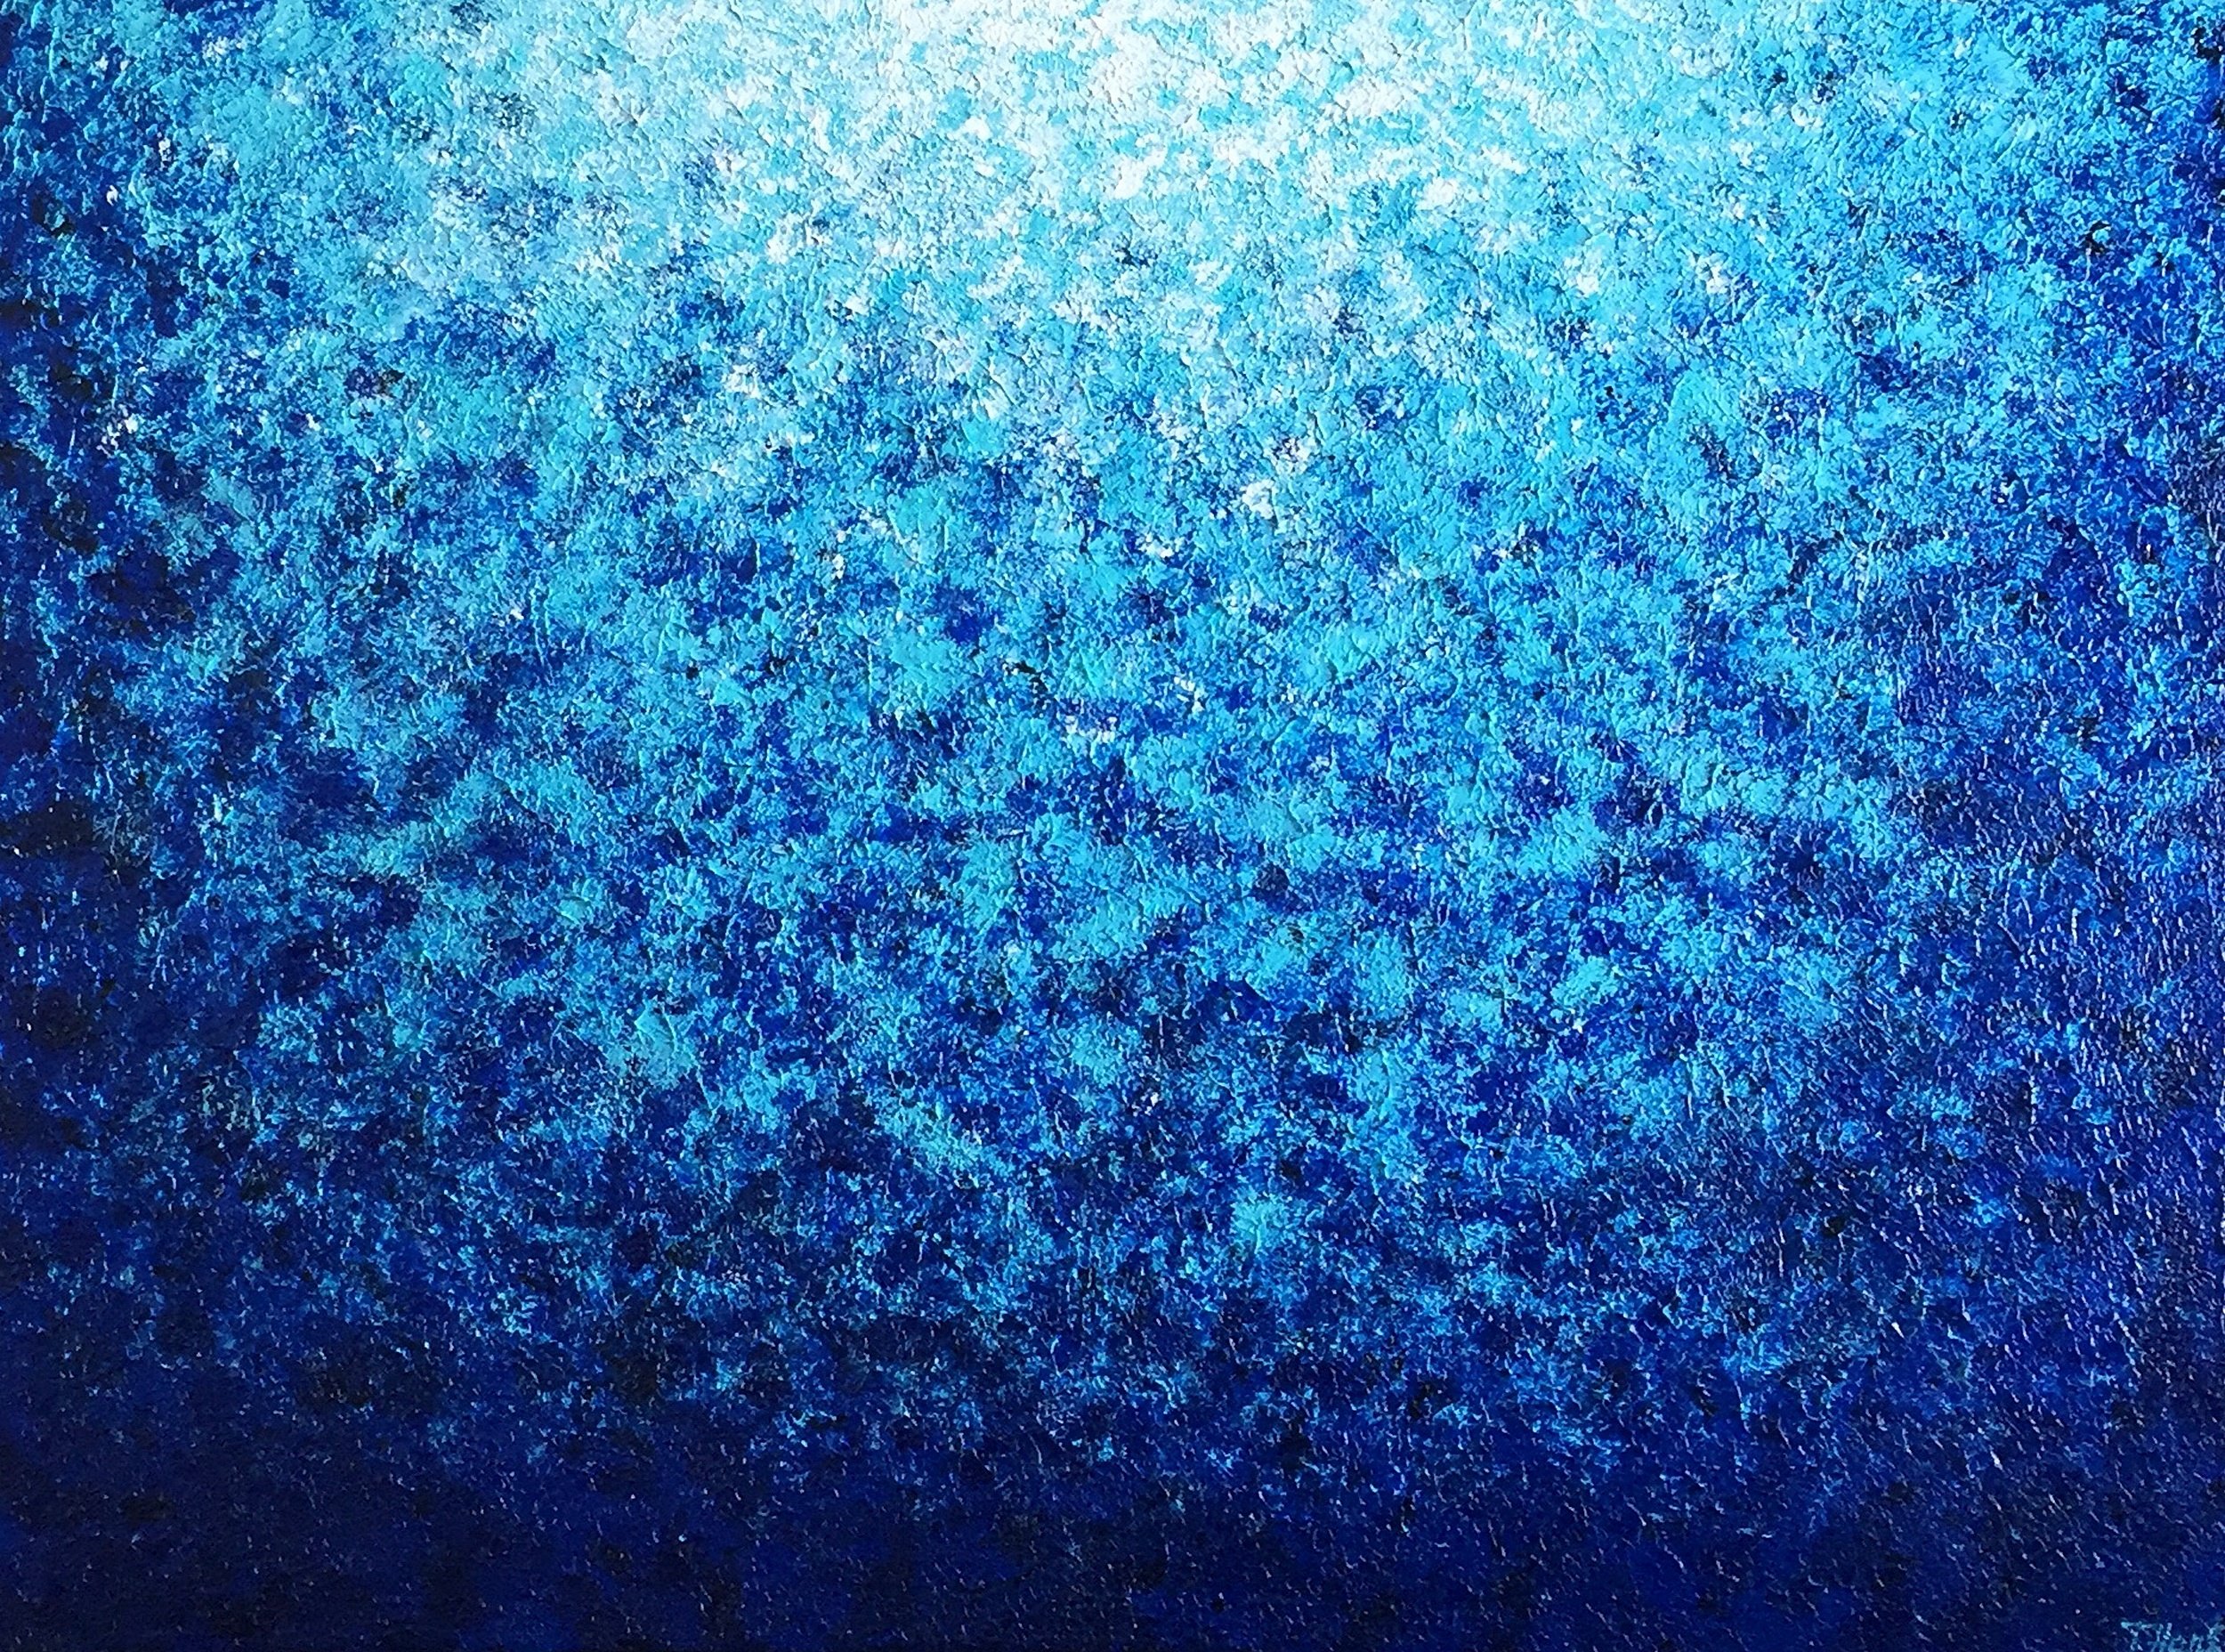 Tanya  Hansen; Ocean Floor, 2019, Original Painting Acrylic, 40 x 30 inches. Artwork description: 241  Ocean Floor- abstract modern art, minimalist seascape painting, textured painting, ready to hang, 2 coats of varnish, artist wrapped canvas.  A great addition as an accent decor for living rooms, dining rooms, kids rooms, offices.Great abstract seascape, full textured painting, relaxing painting.  Wonderful fit in any ...